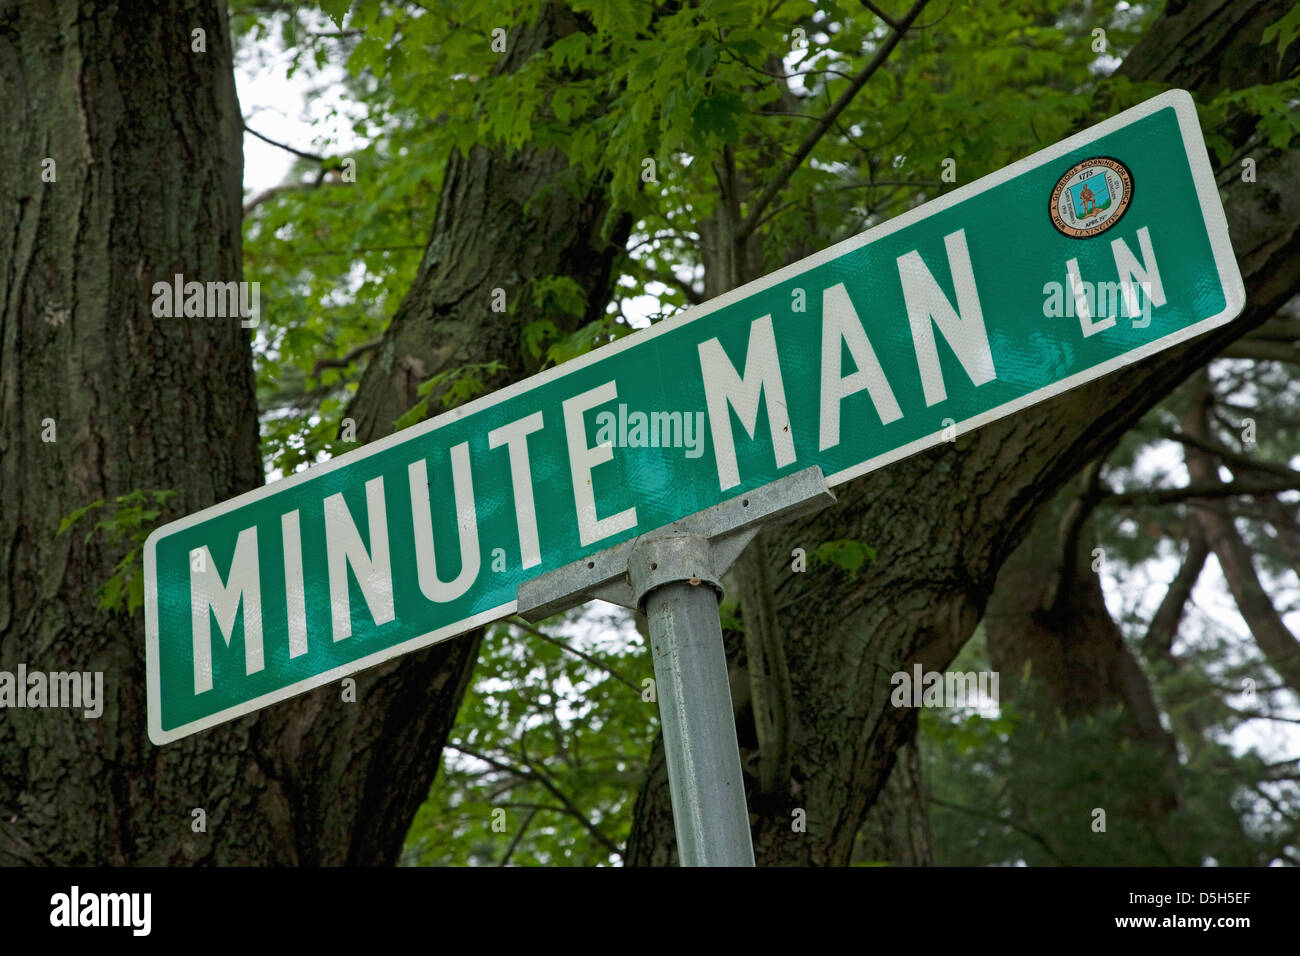 Minute Man Lane, outside Lexington MA to symbolize the Minute Man Soldiers of the Revolutionary War, 1776, MA Stock Photo